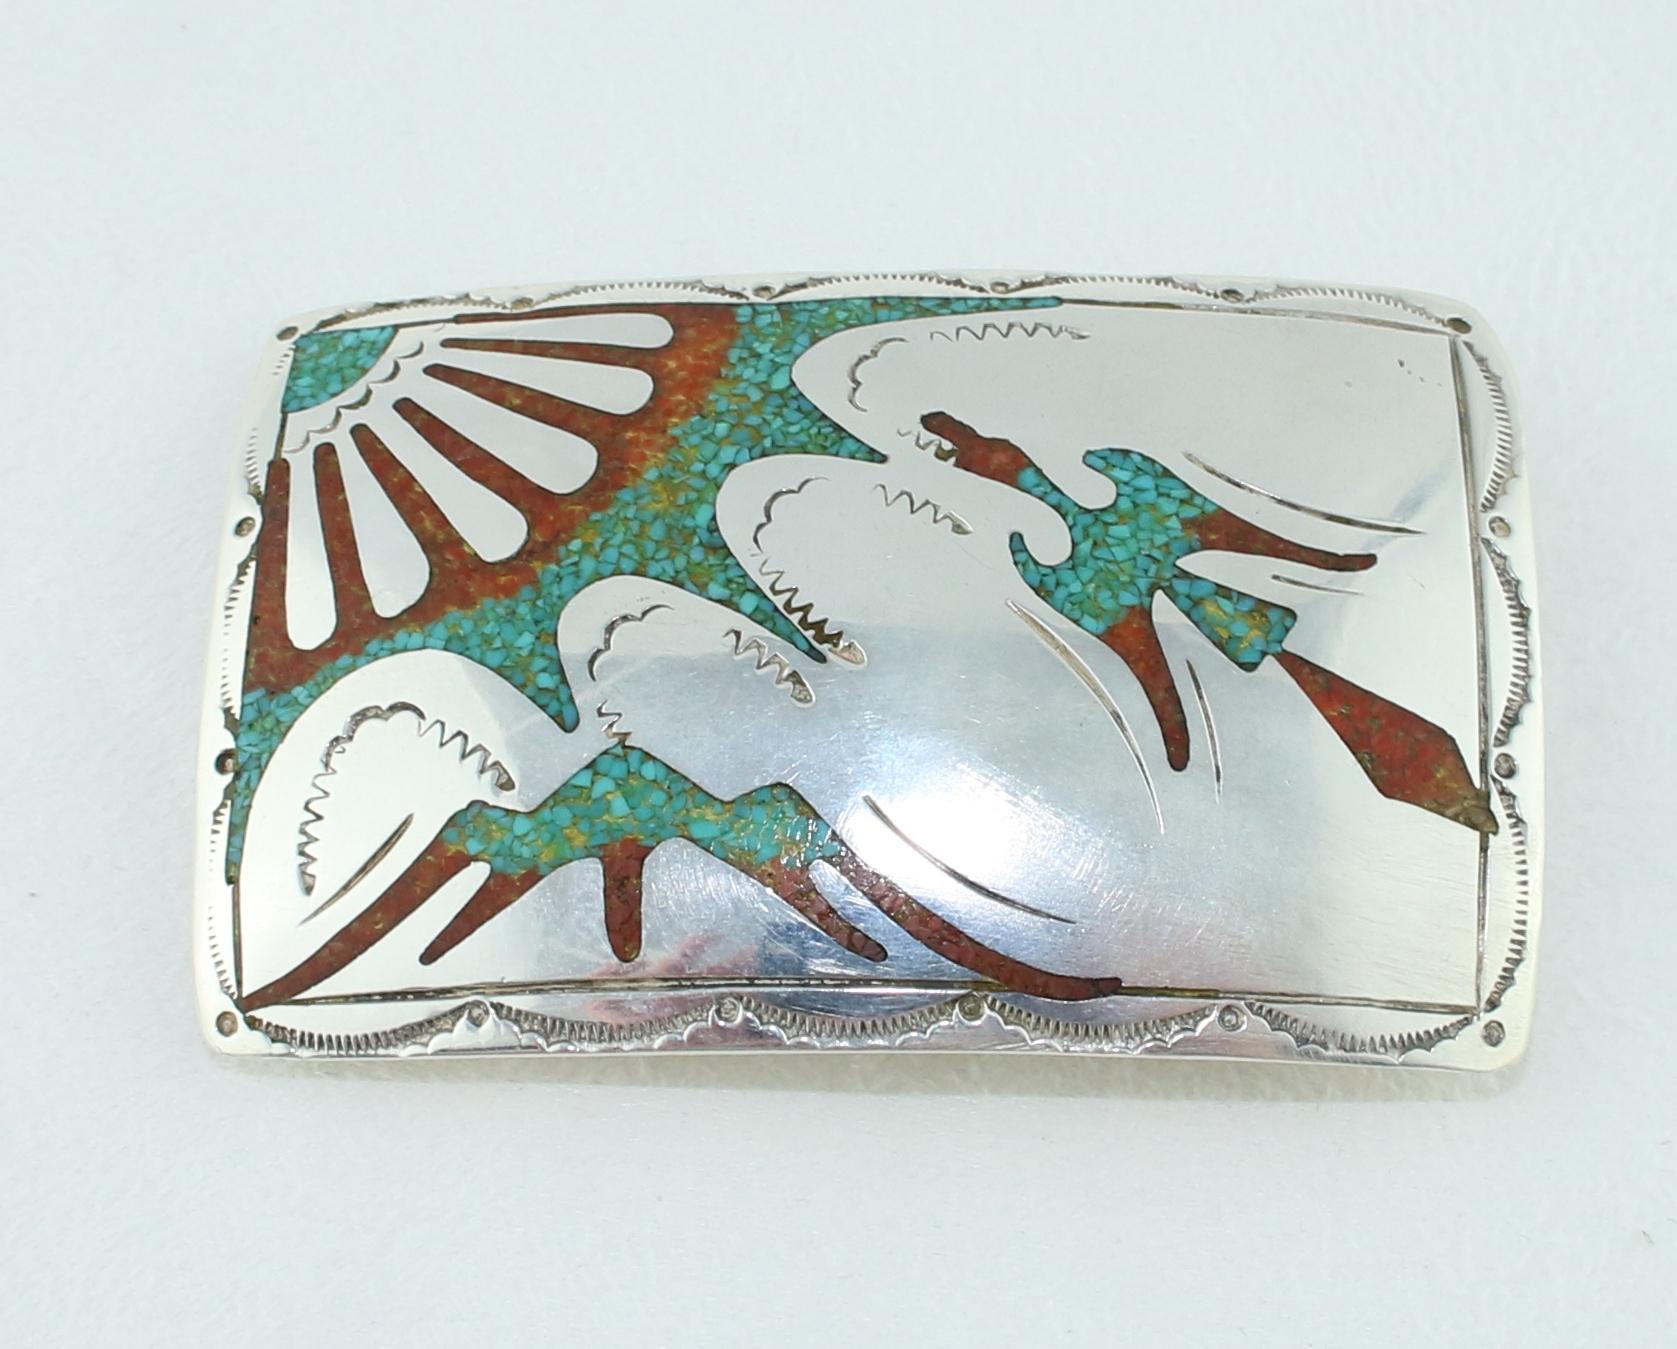 Stunning Navajo Peublo Scene by Frank Bowman
The scene depicts of Sun & Mountain and Peyote Bird In flight
The belt buckle has turquoise and coral chip inlay and is sterling silver
There is a makers mark on the back.
The buckle measures 2.75